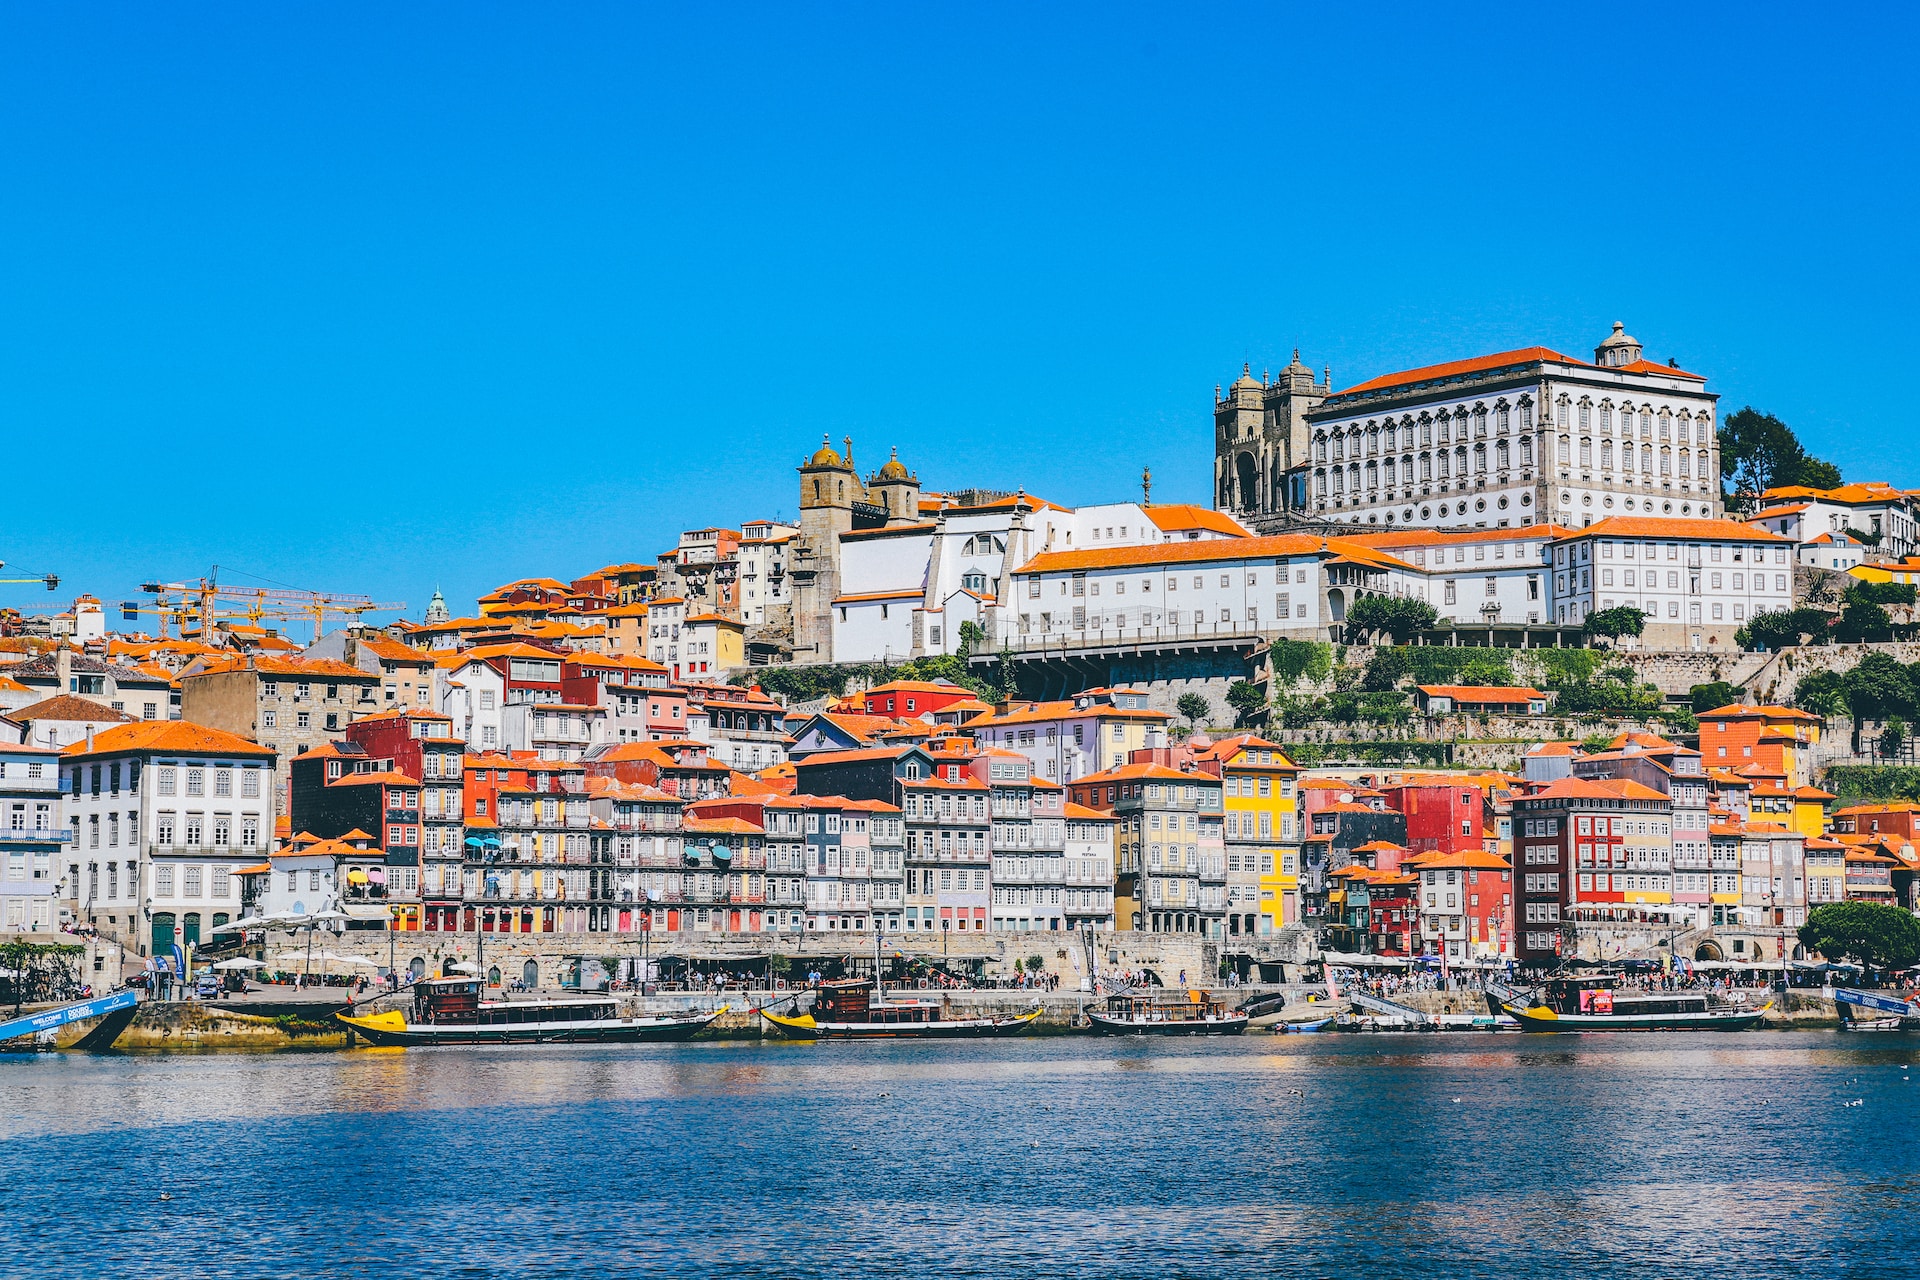 Coastline of Porto, Portugal with boats and terracotta buildings